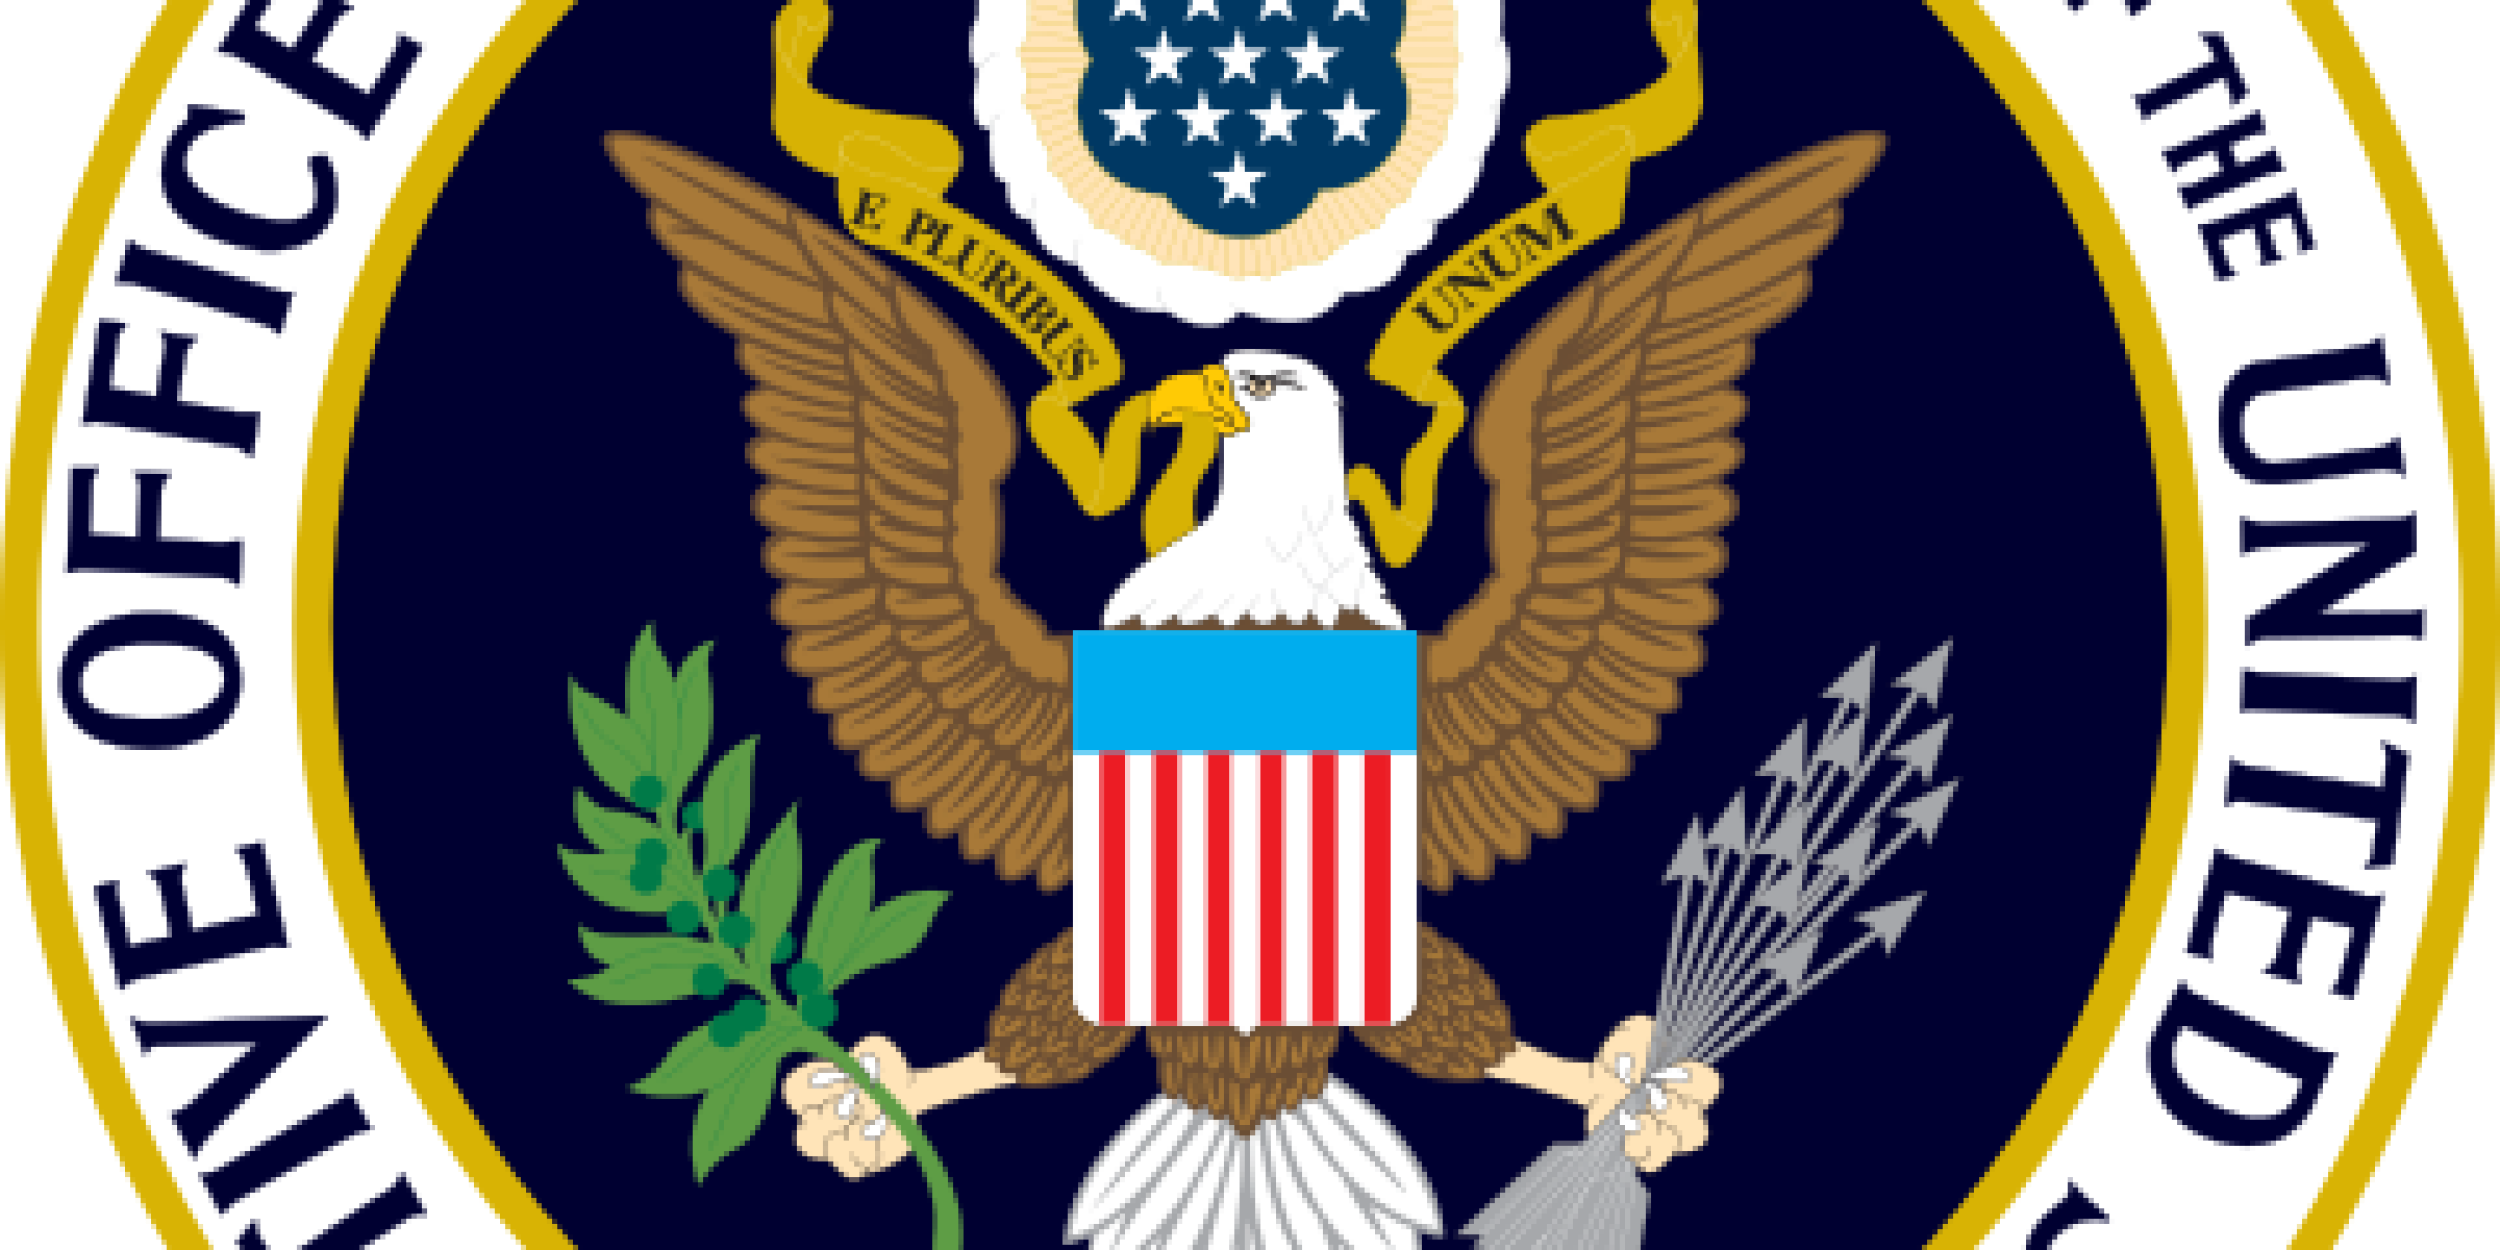 528958480px-seal_of_the_executive_office_of_the_president_of_the_united_states_2014.svg